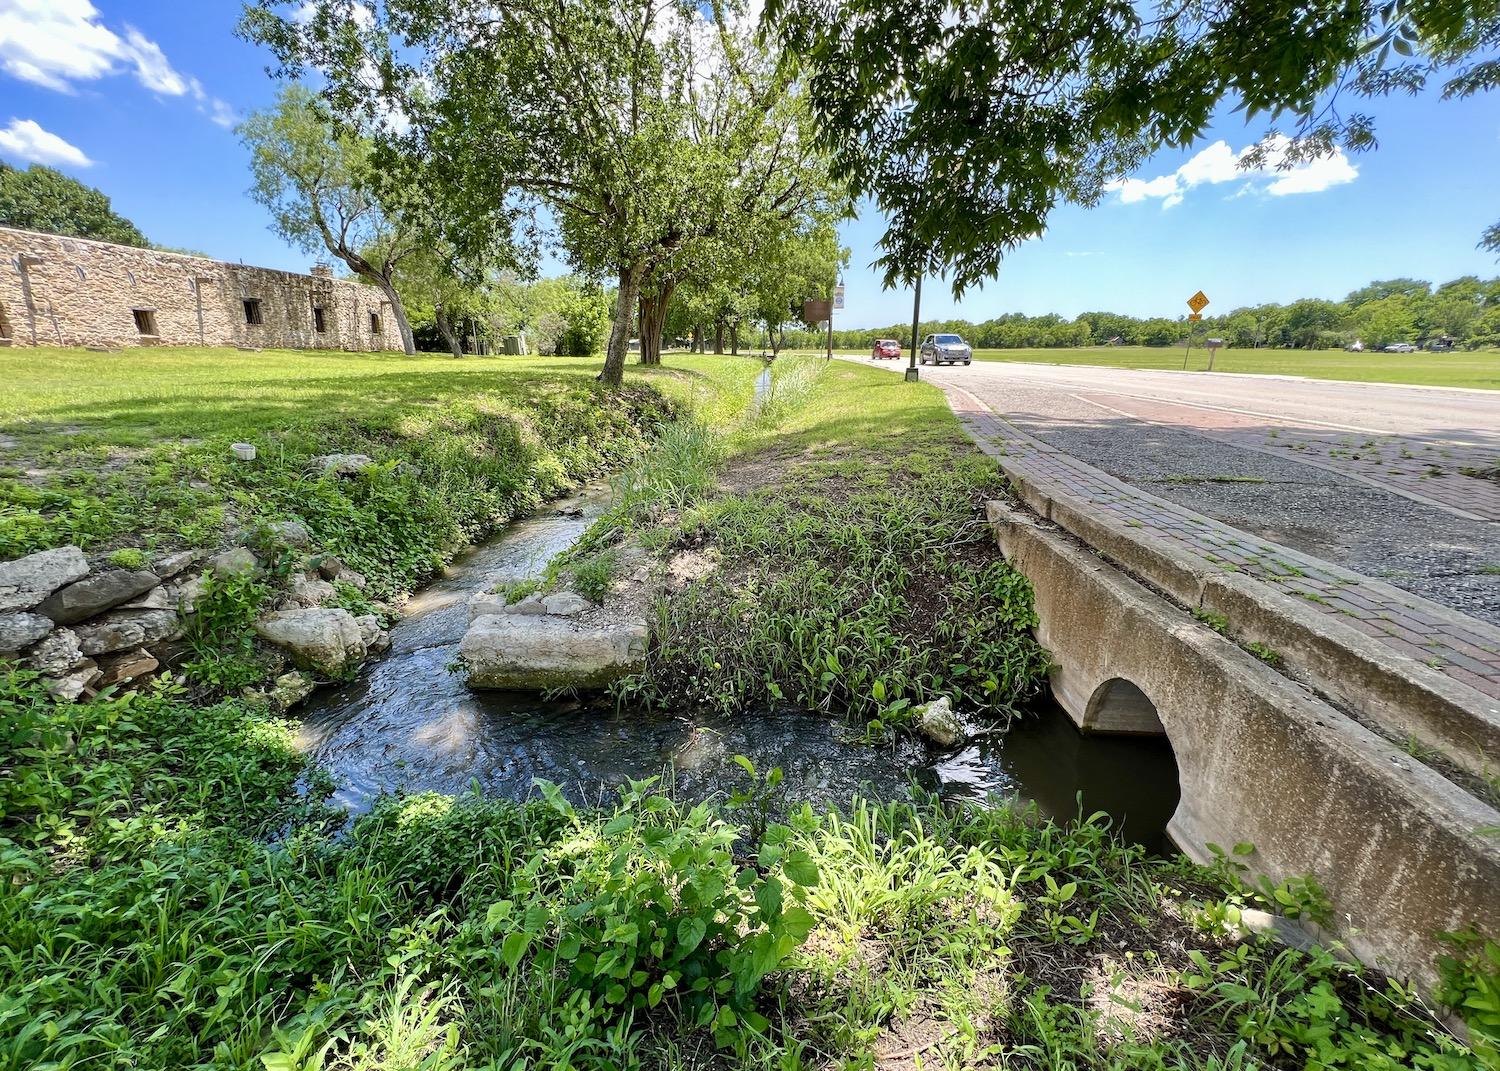 Just outside Mission Espada, you can see the acequia as you drive by.